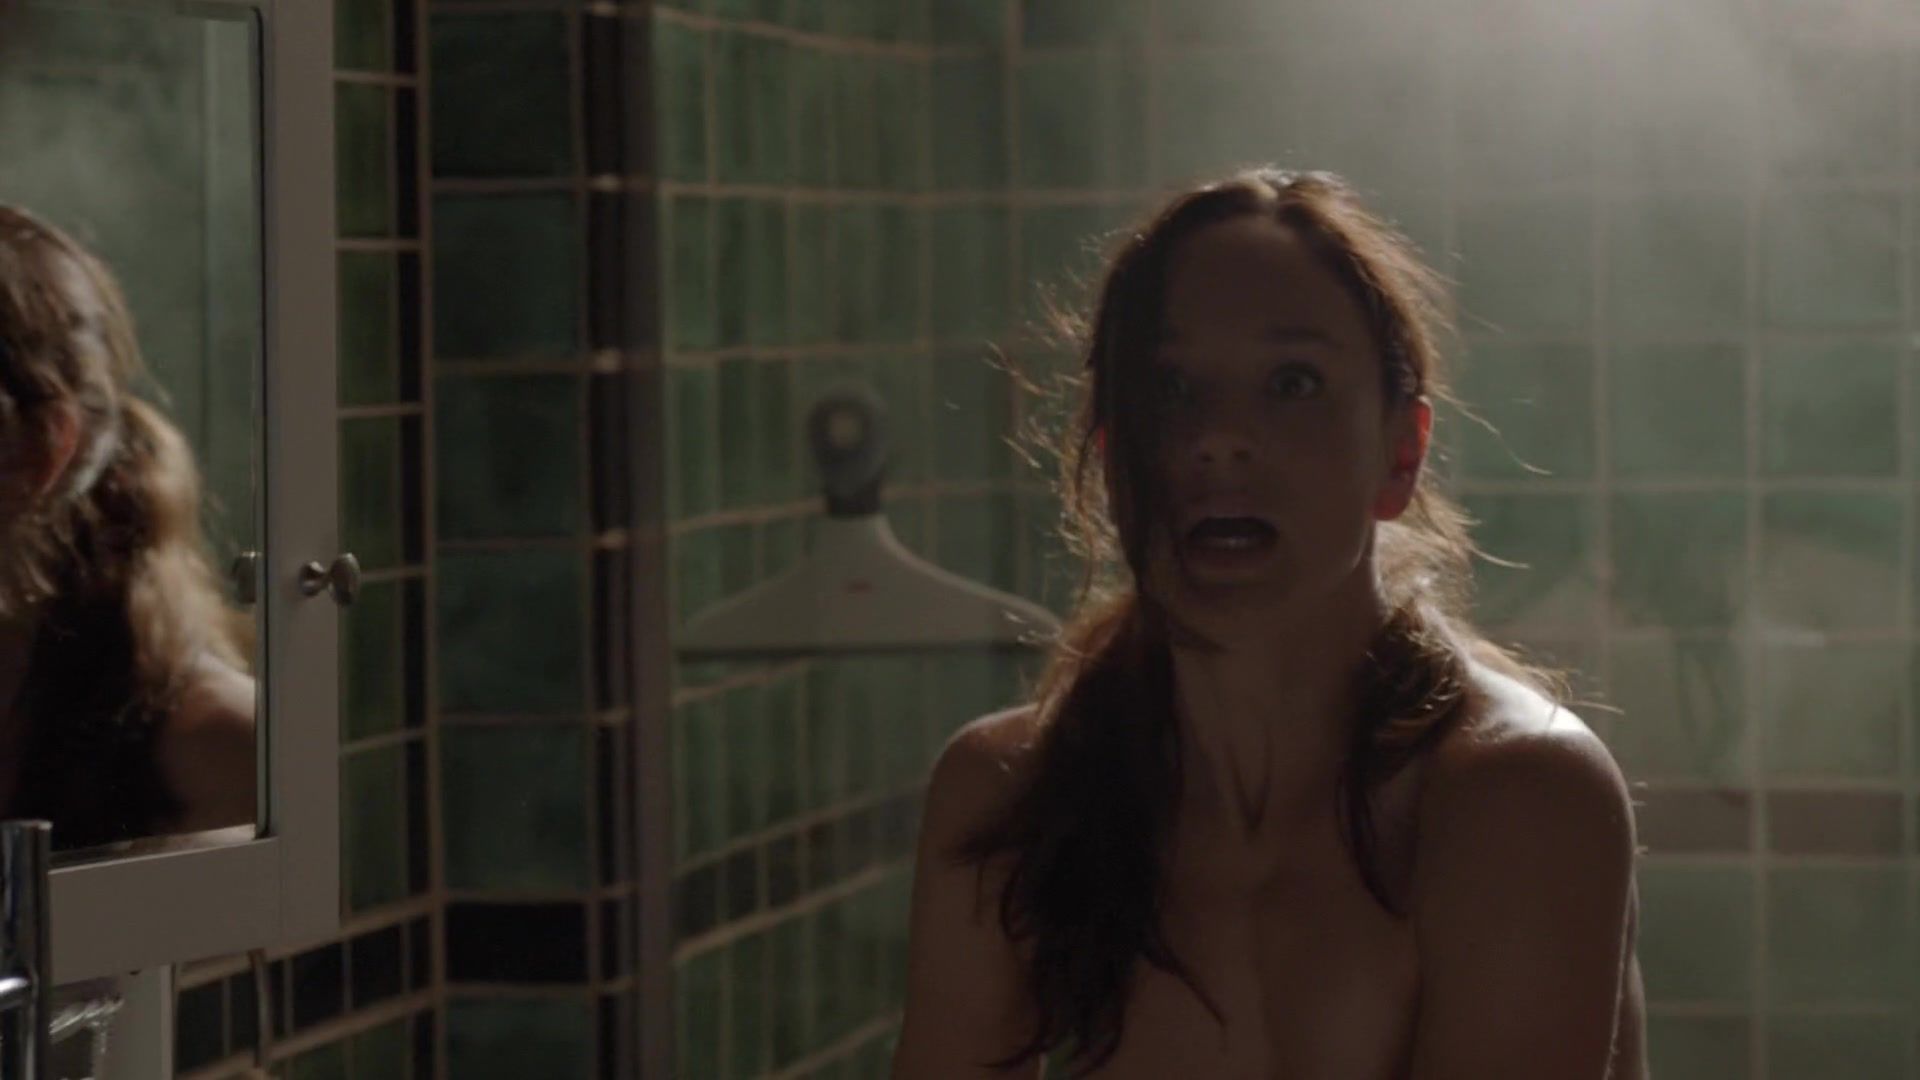 Tight Pussy Naked Sarah Wayne Callies in Sex Scene from the TV show "Colony" s01e03 (2016) Gay Dudes - 1